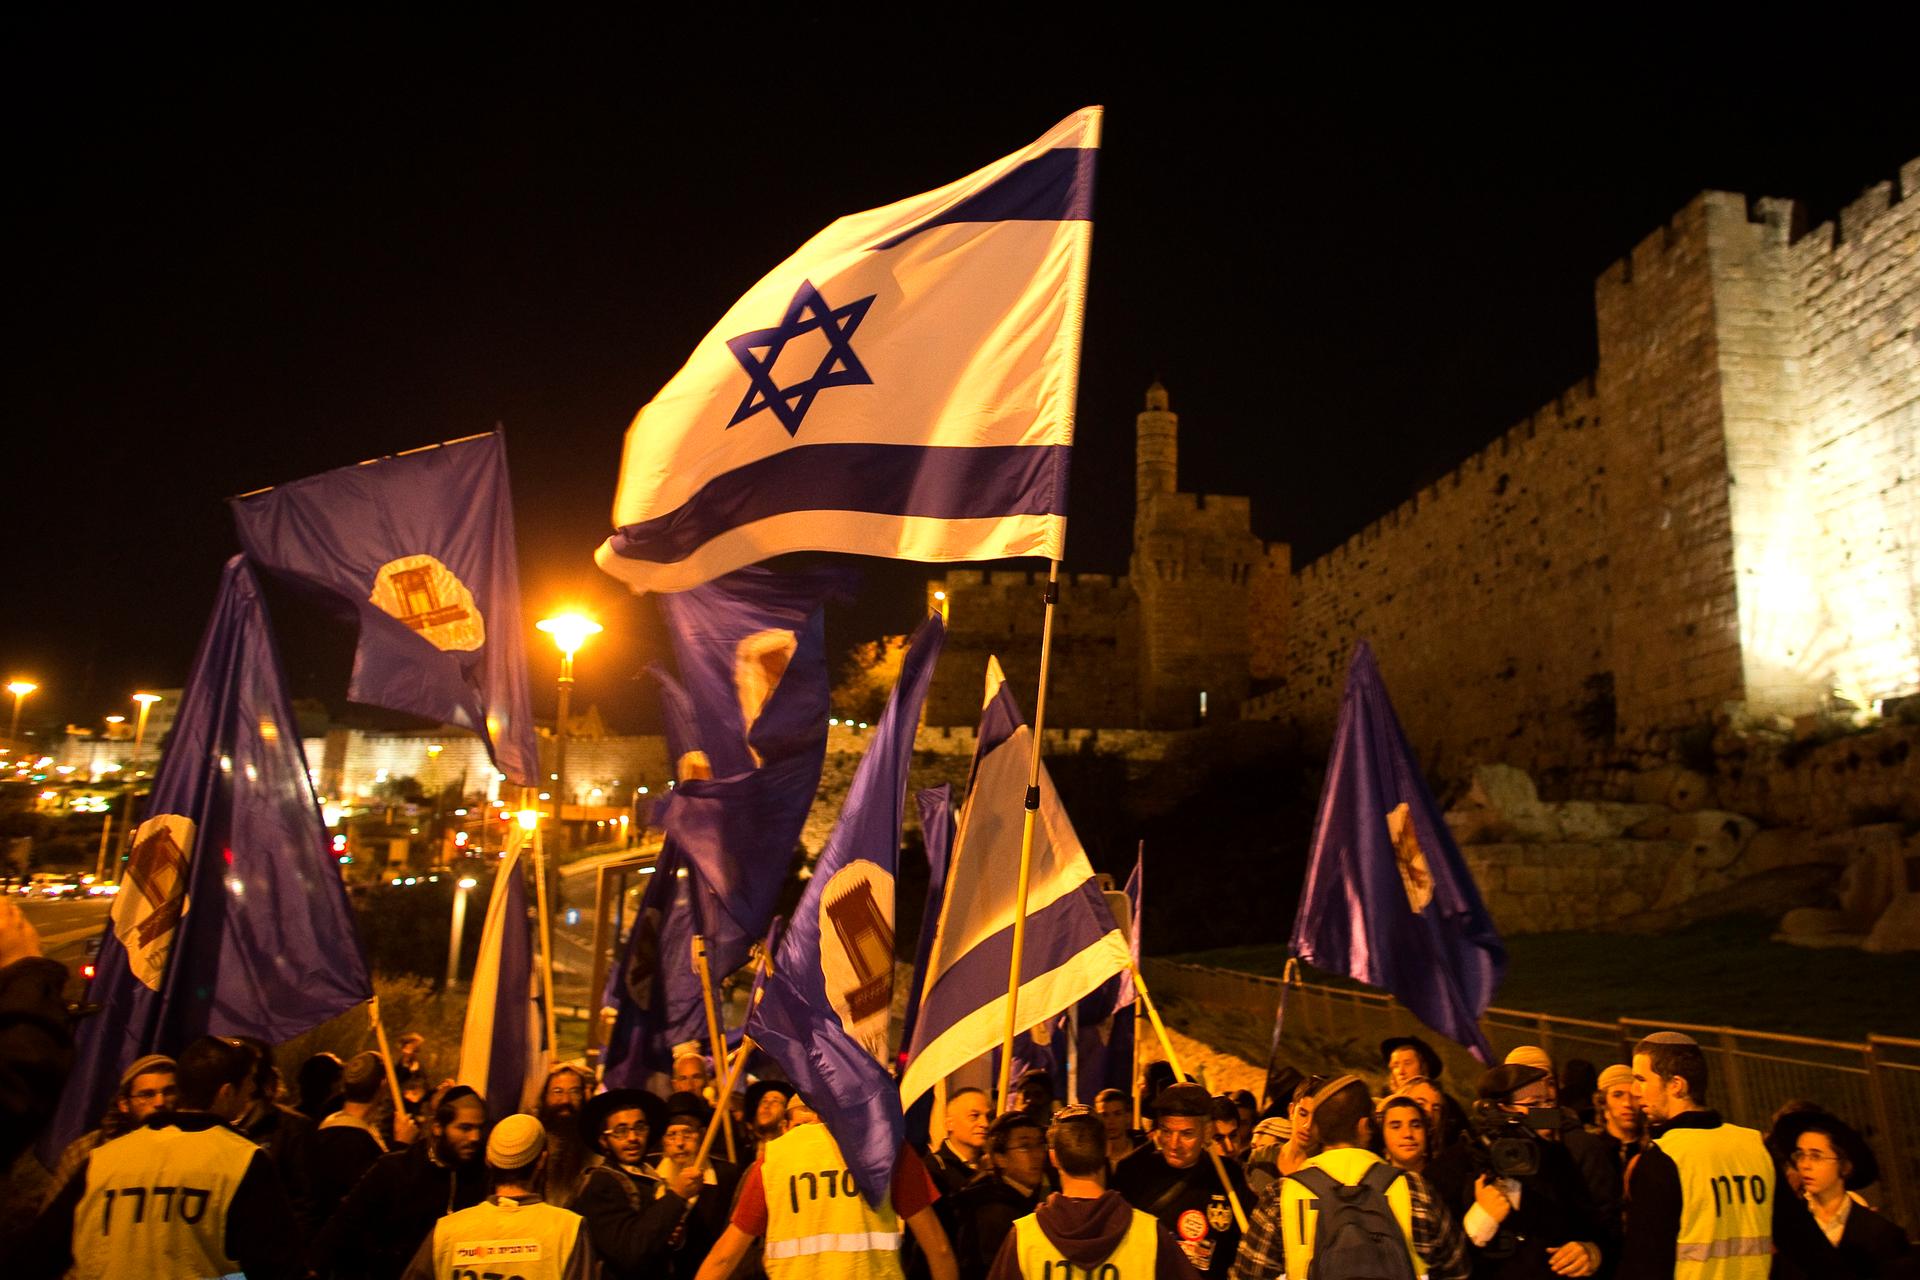 Israeli right-wing activists rallied on Thursday for Jewish prayer rights at the holiest site in Jerusalem, the compound known to Muslims as Noble Sanctuary and to Jews as Temple Mount.